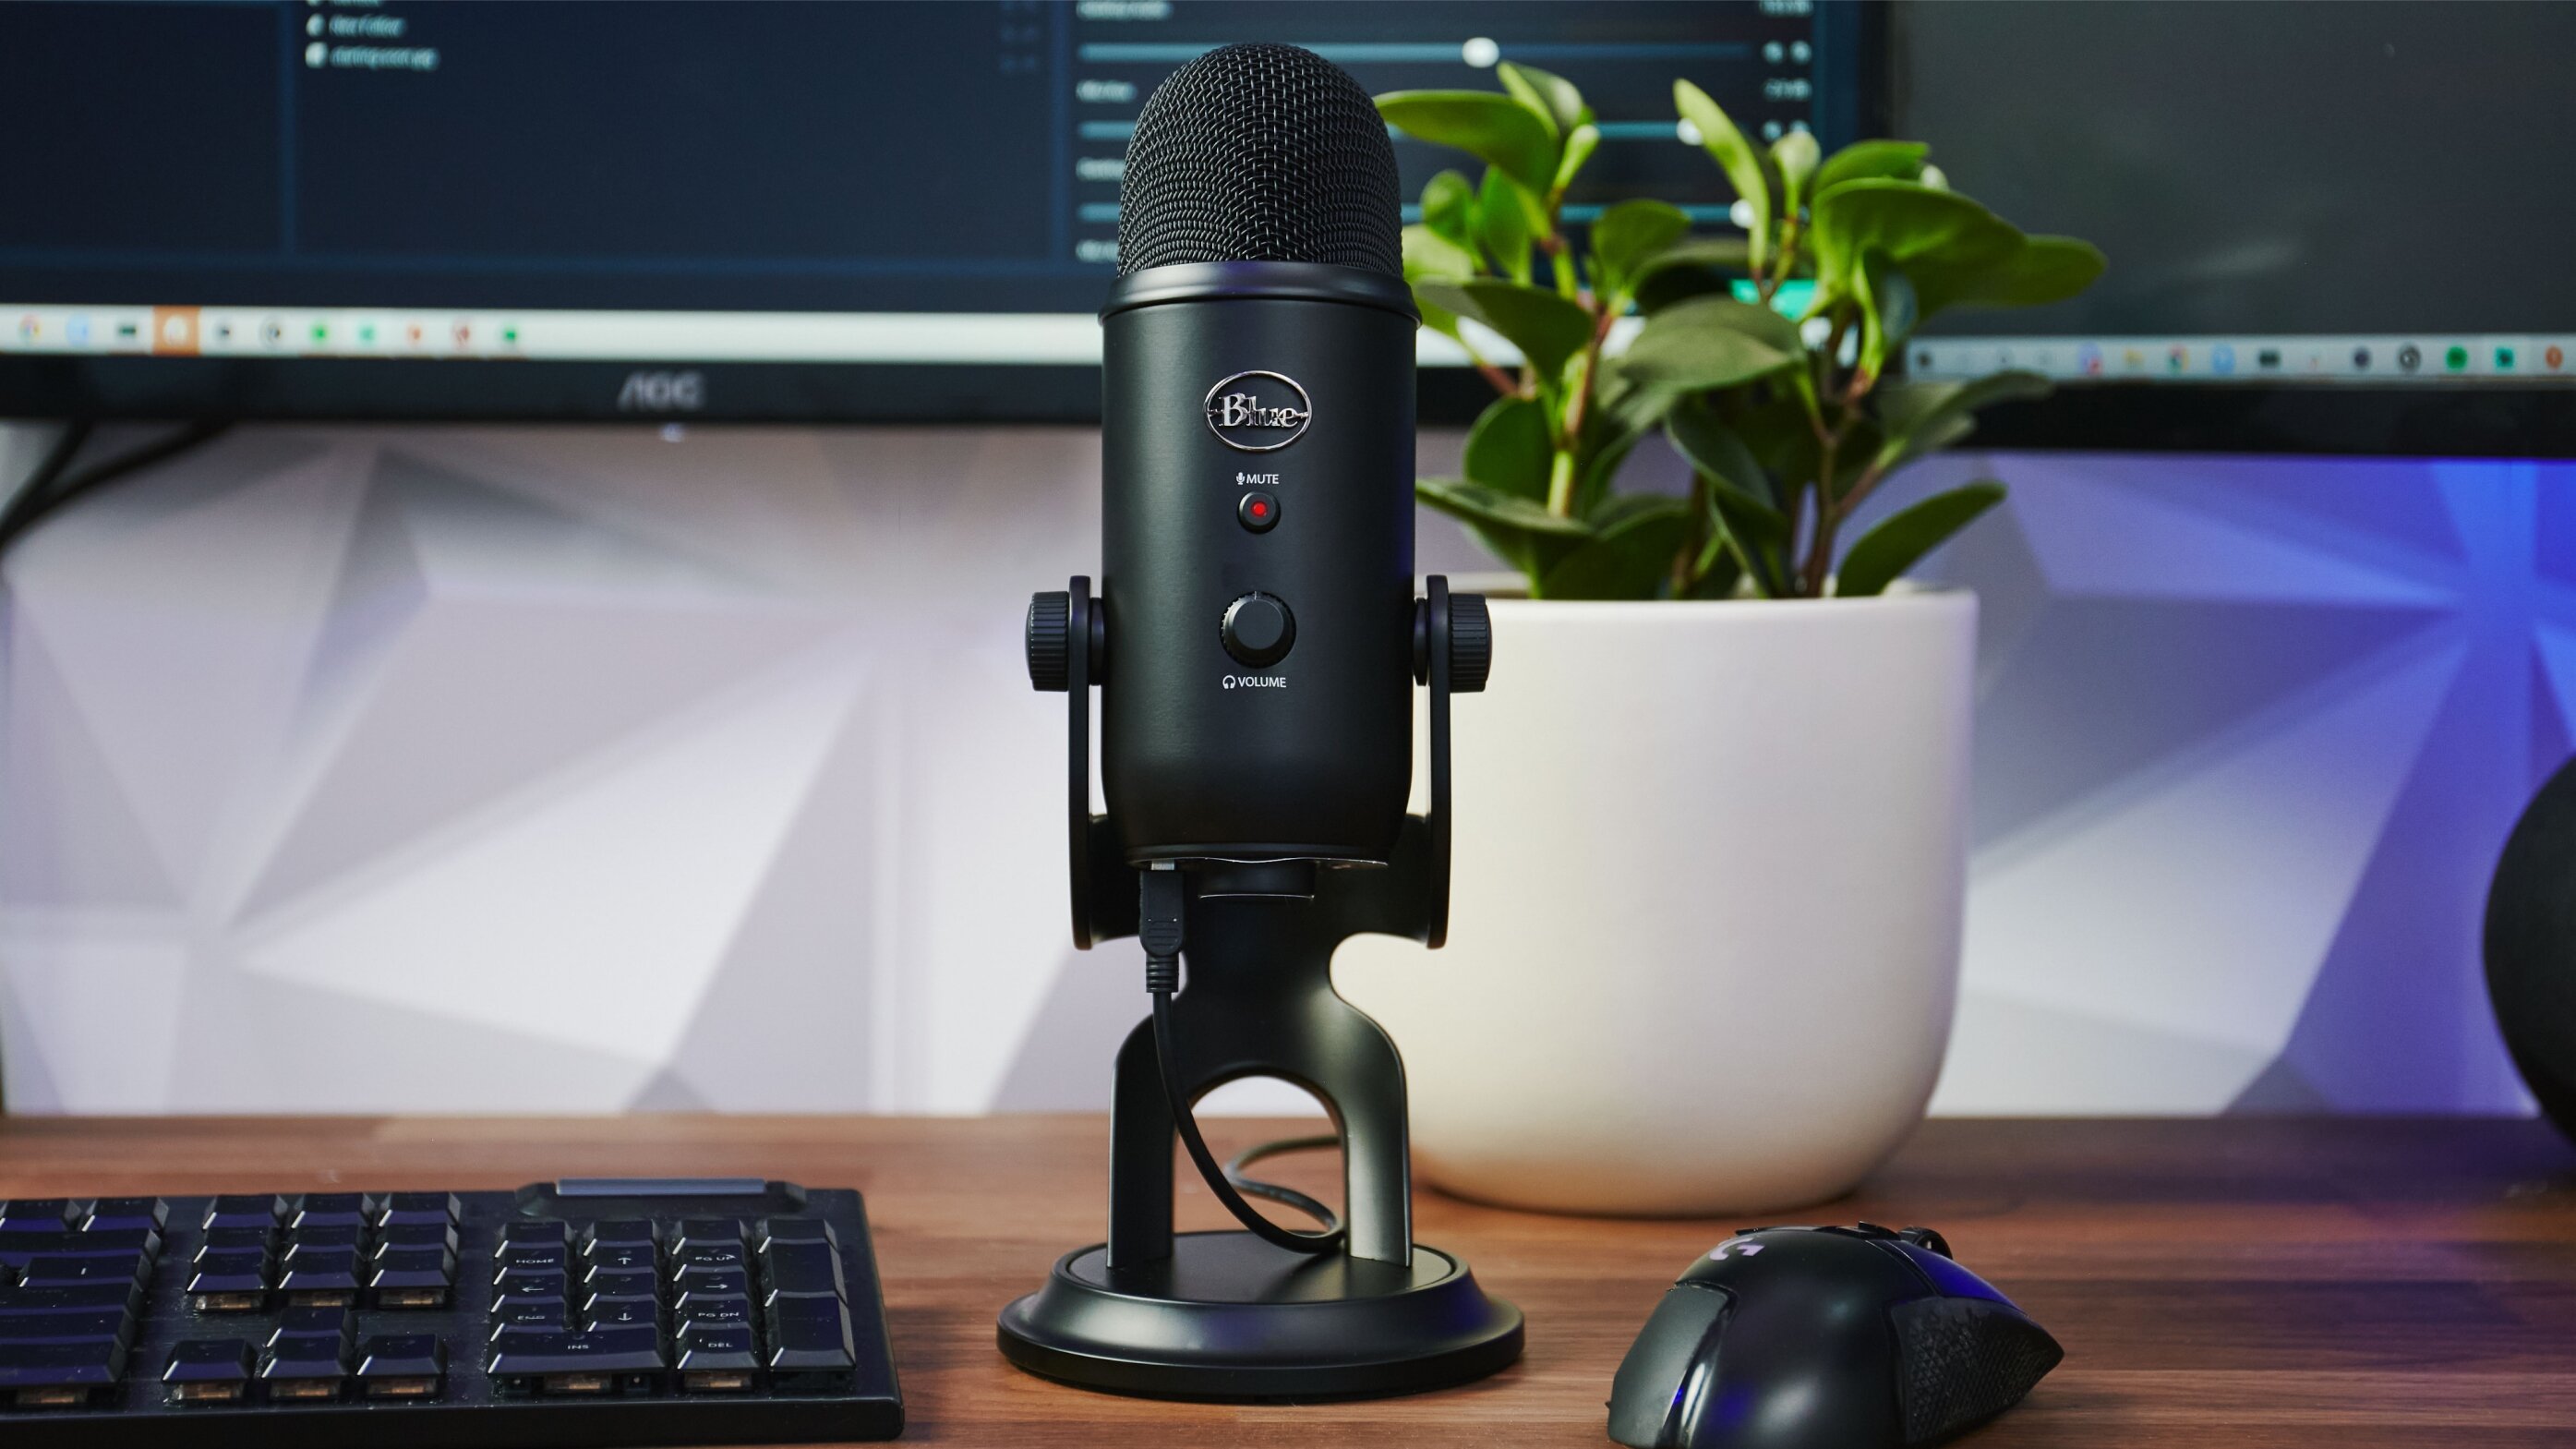  Logitech for Creators Blue Yeti USB Microphone for Gaming,  Streaming, Podcasting, Twitch, , Discord, Recording for PC and Mac,  4 Polar Patterns, Studio Quality Sound, Plug & Play-White Mist : Musical